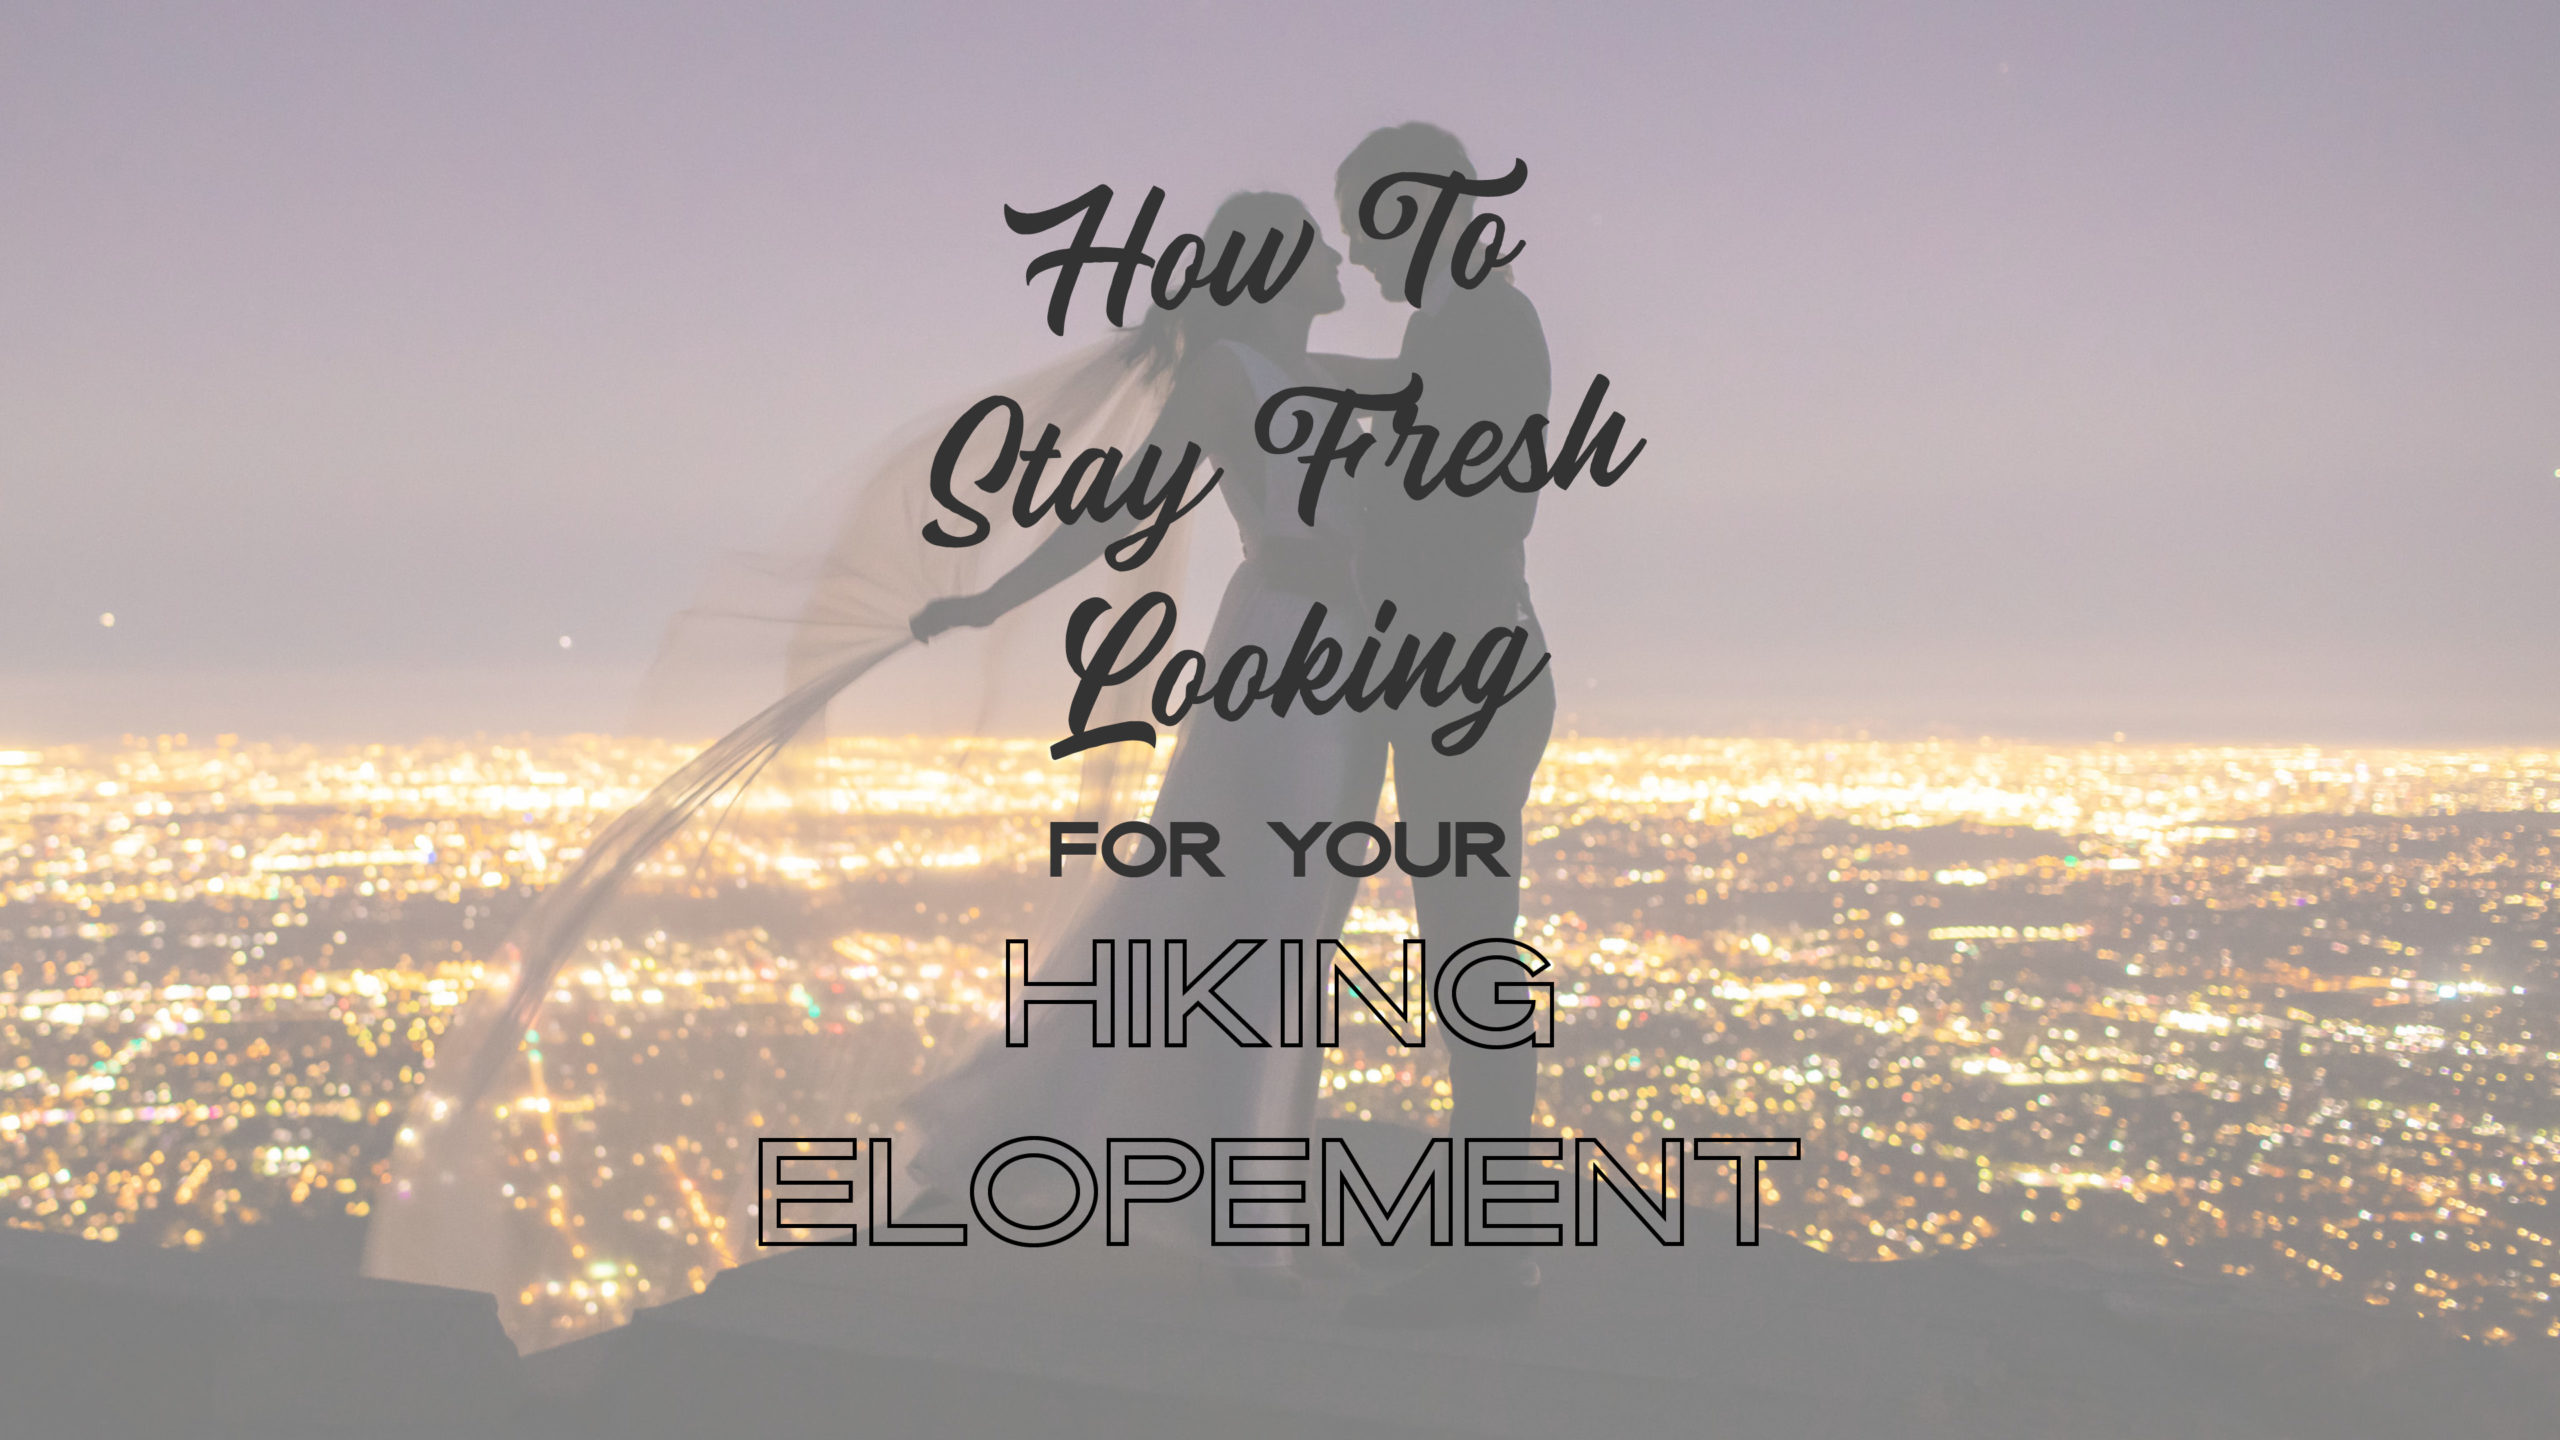 How-to-stay-fresh-looking-scaled 6 Adventure Elopement Tips: How to Stay Looking Fresh for Your Hiking Elopement